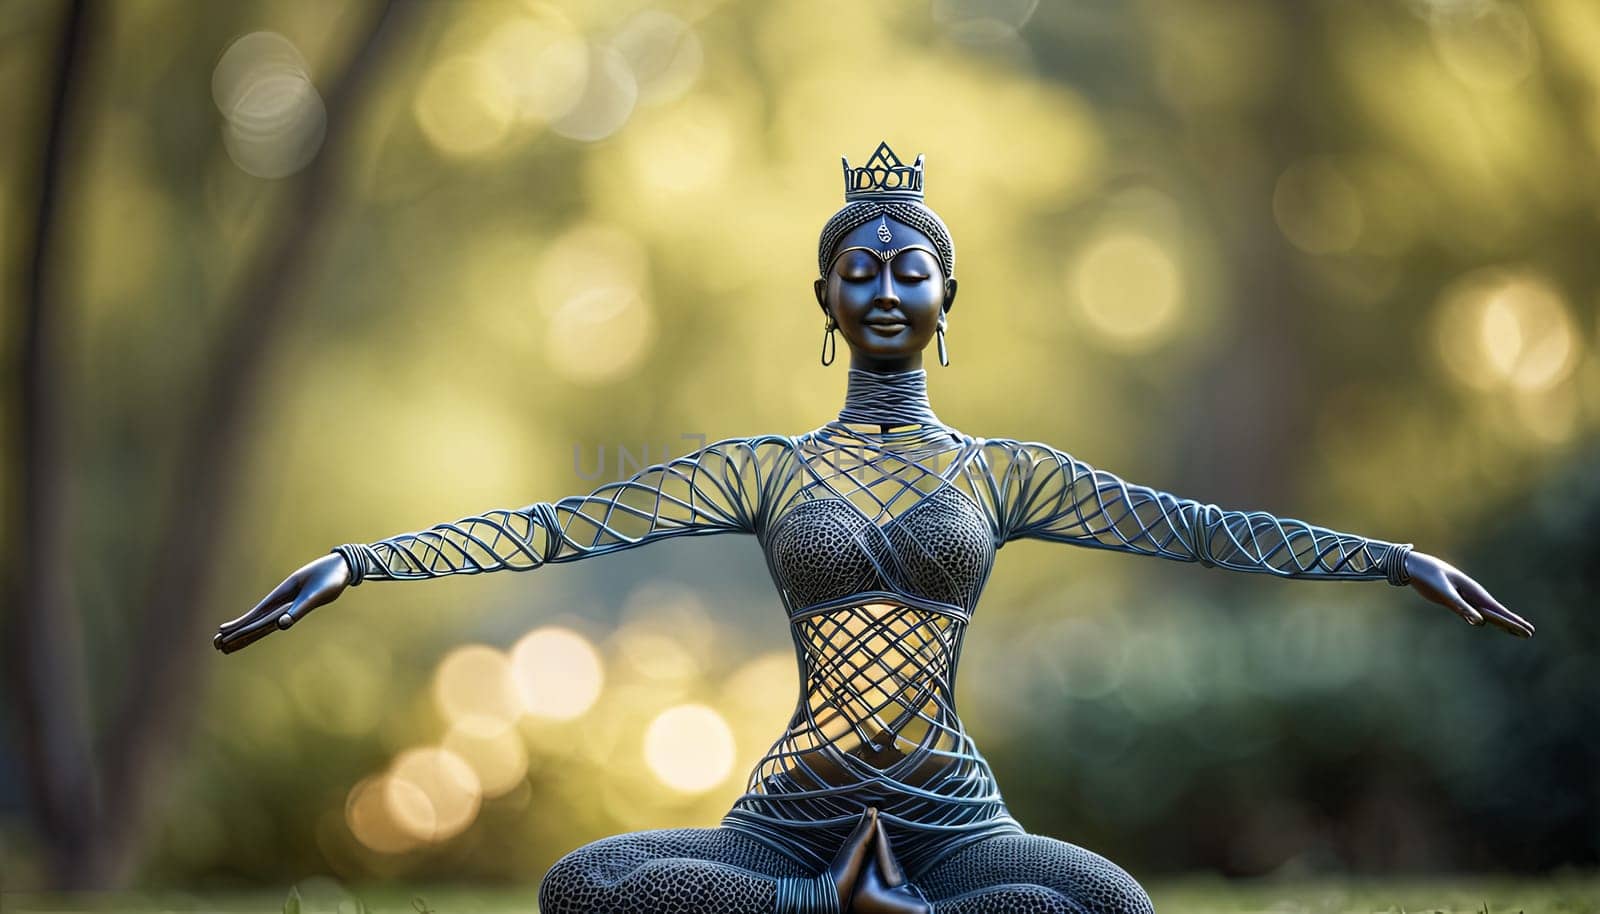 Woman in yoga pose, bent wire figure on nature backdrop, Creative figures symbol of tranquility, art and serenity intersection